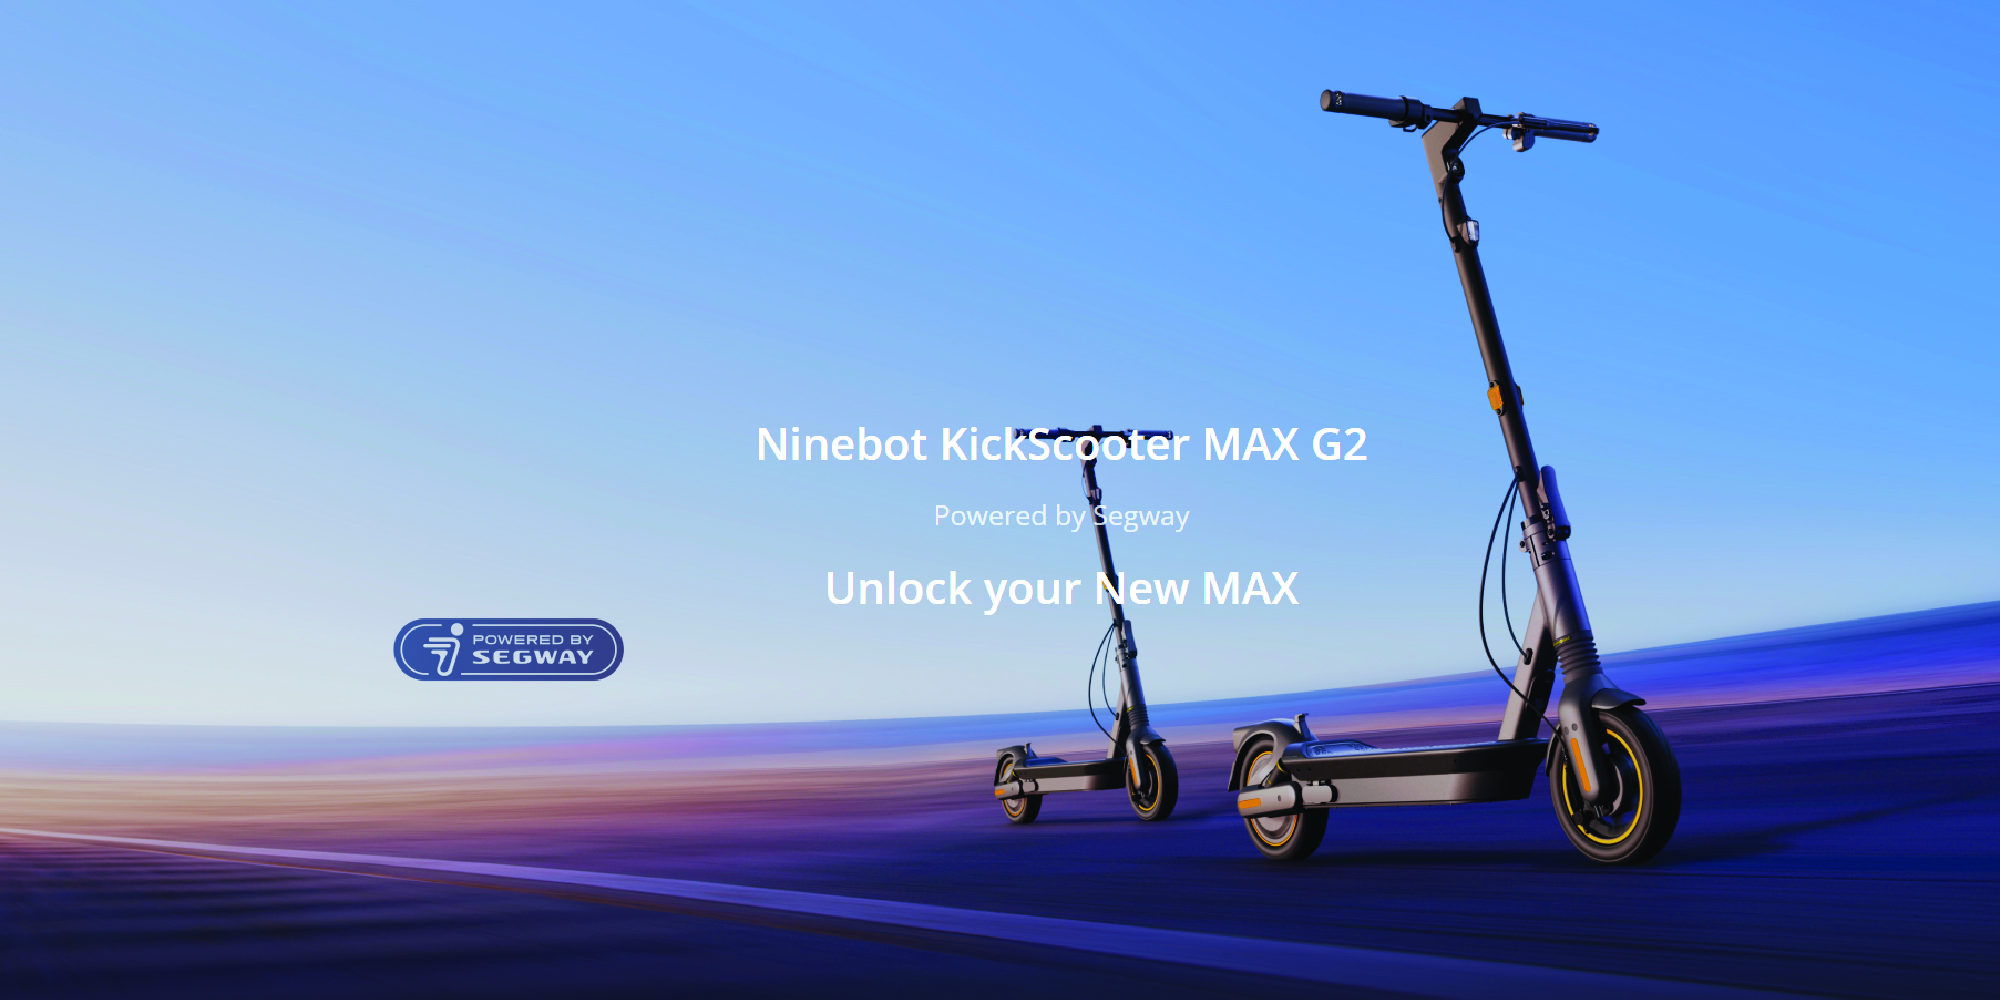 Segway-Ninebot Kick Scooter MAX G2: 75km Range, 25km/h Max Speed, Lightweight and Foldable, IPX5 Water Resistance